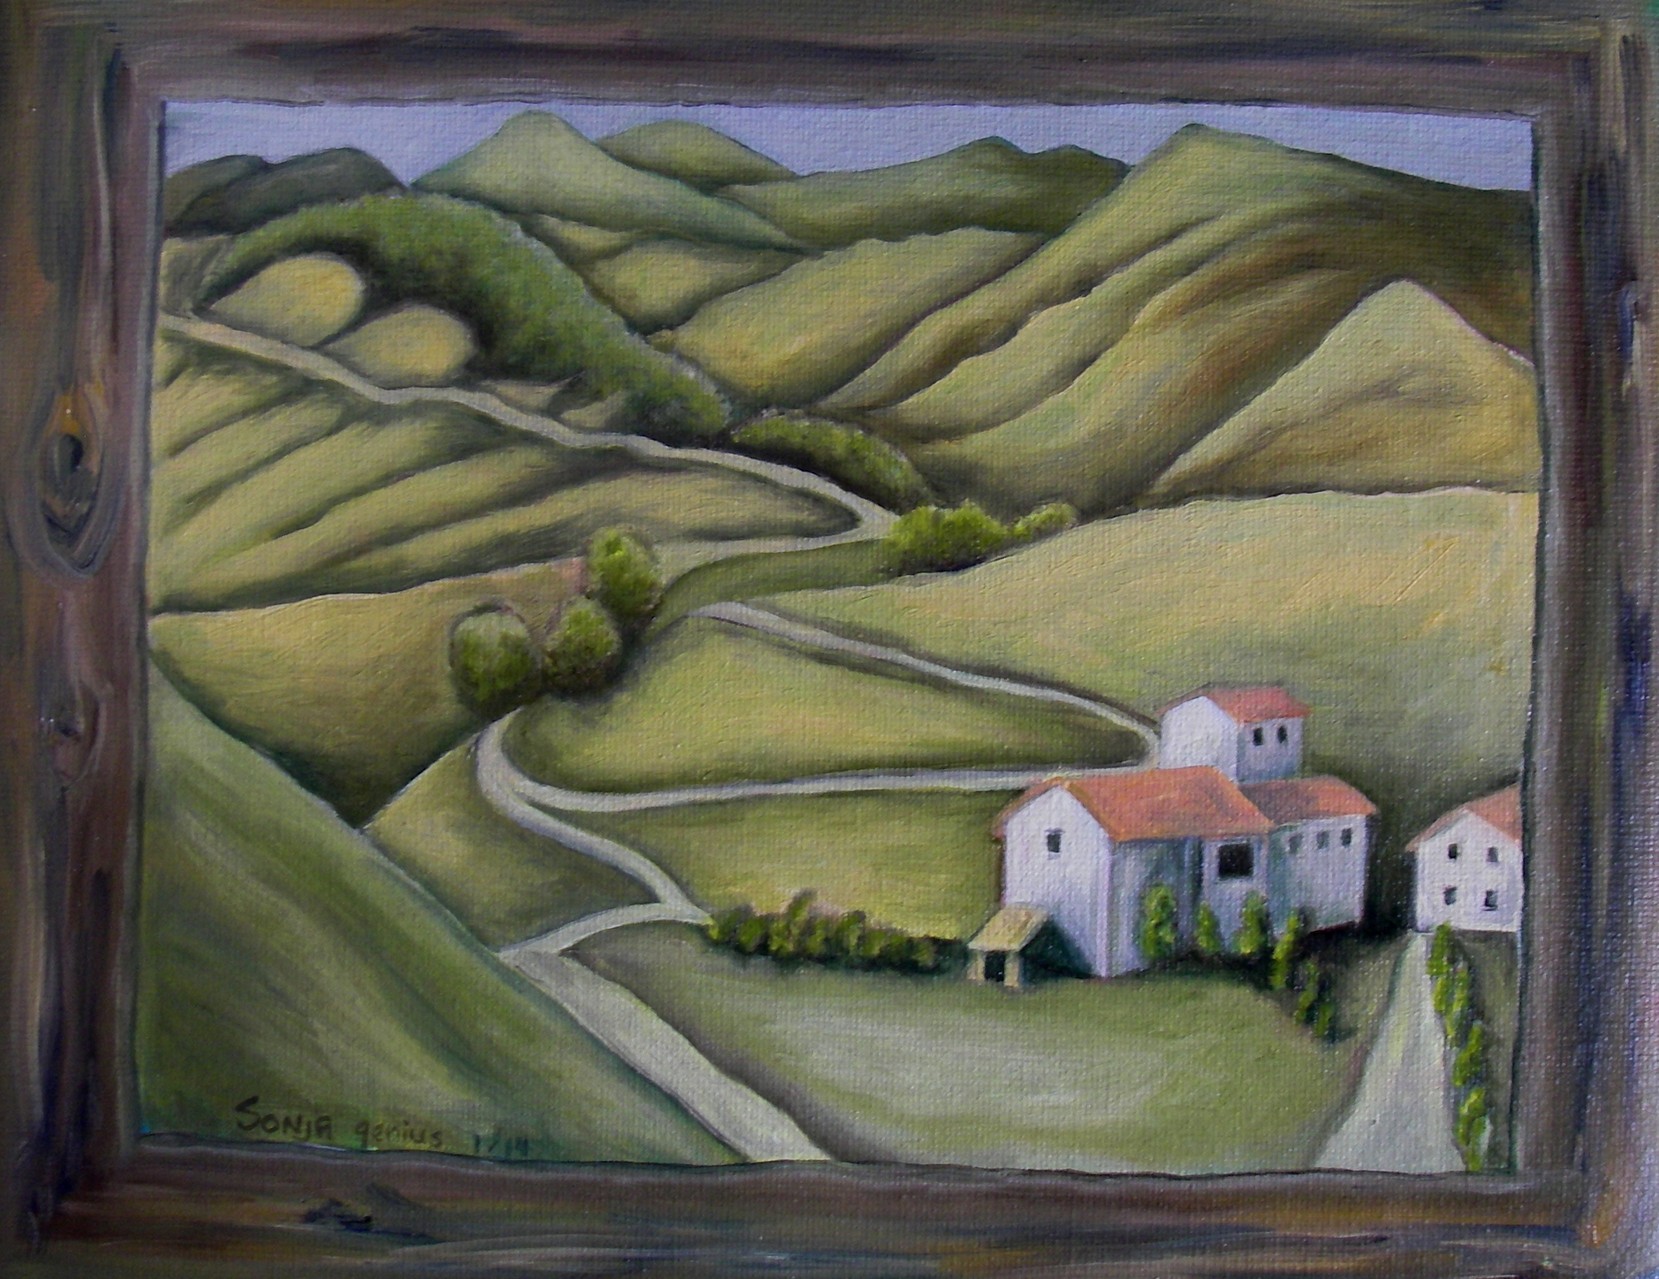 "A little Tuscany", oil on canvas paper 9x11, 2/14 (after Ricardo Francalancia)